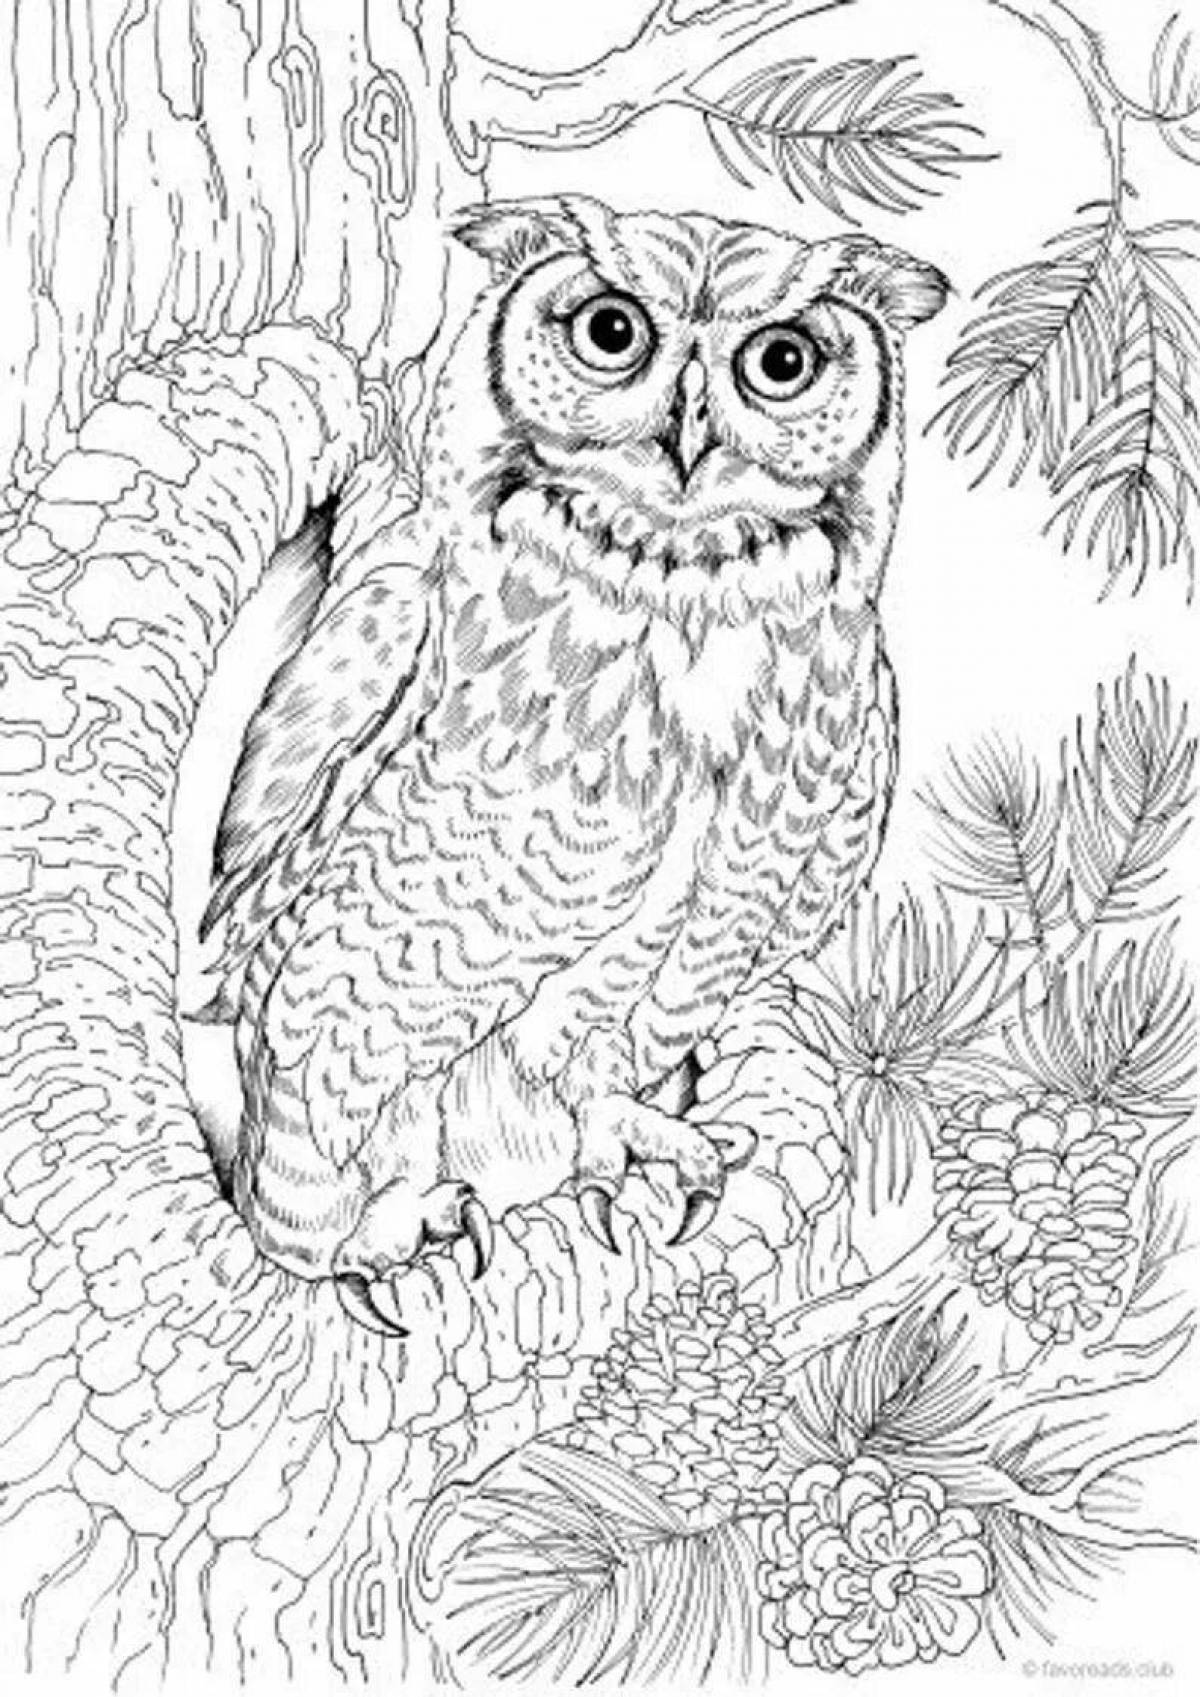 Serene owl coloring in the hollow